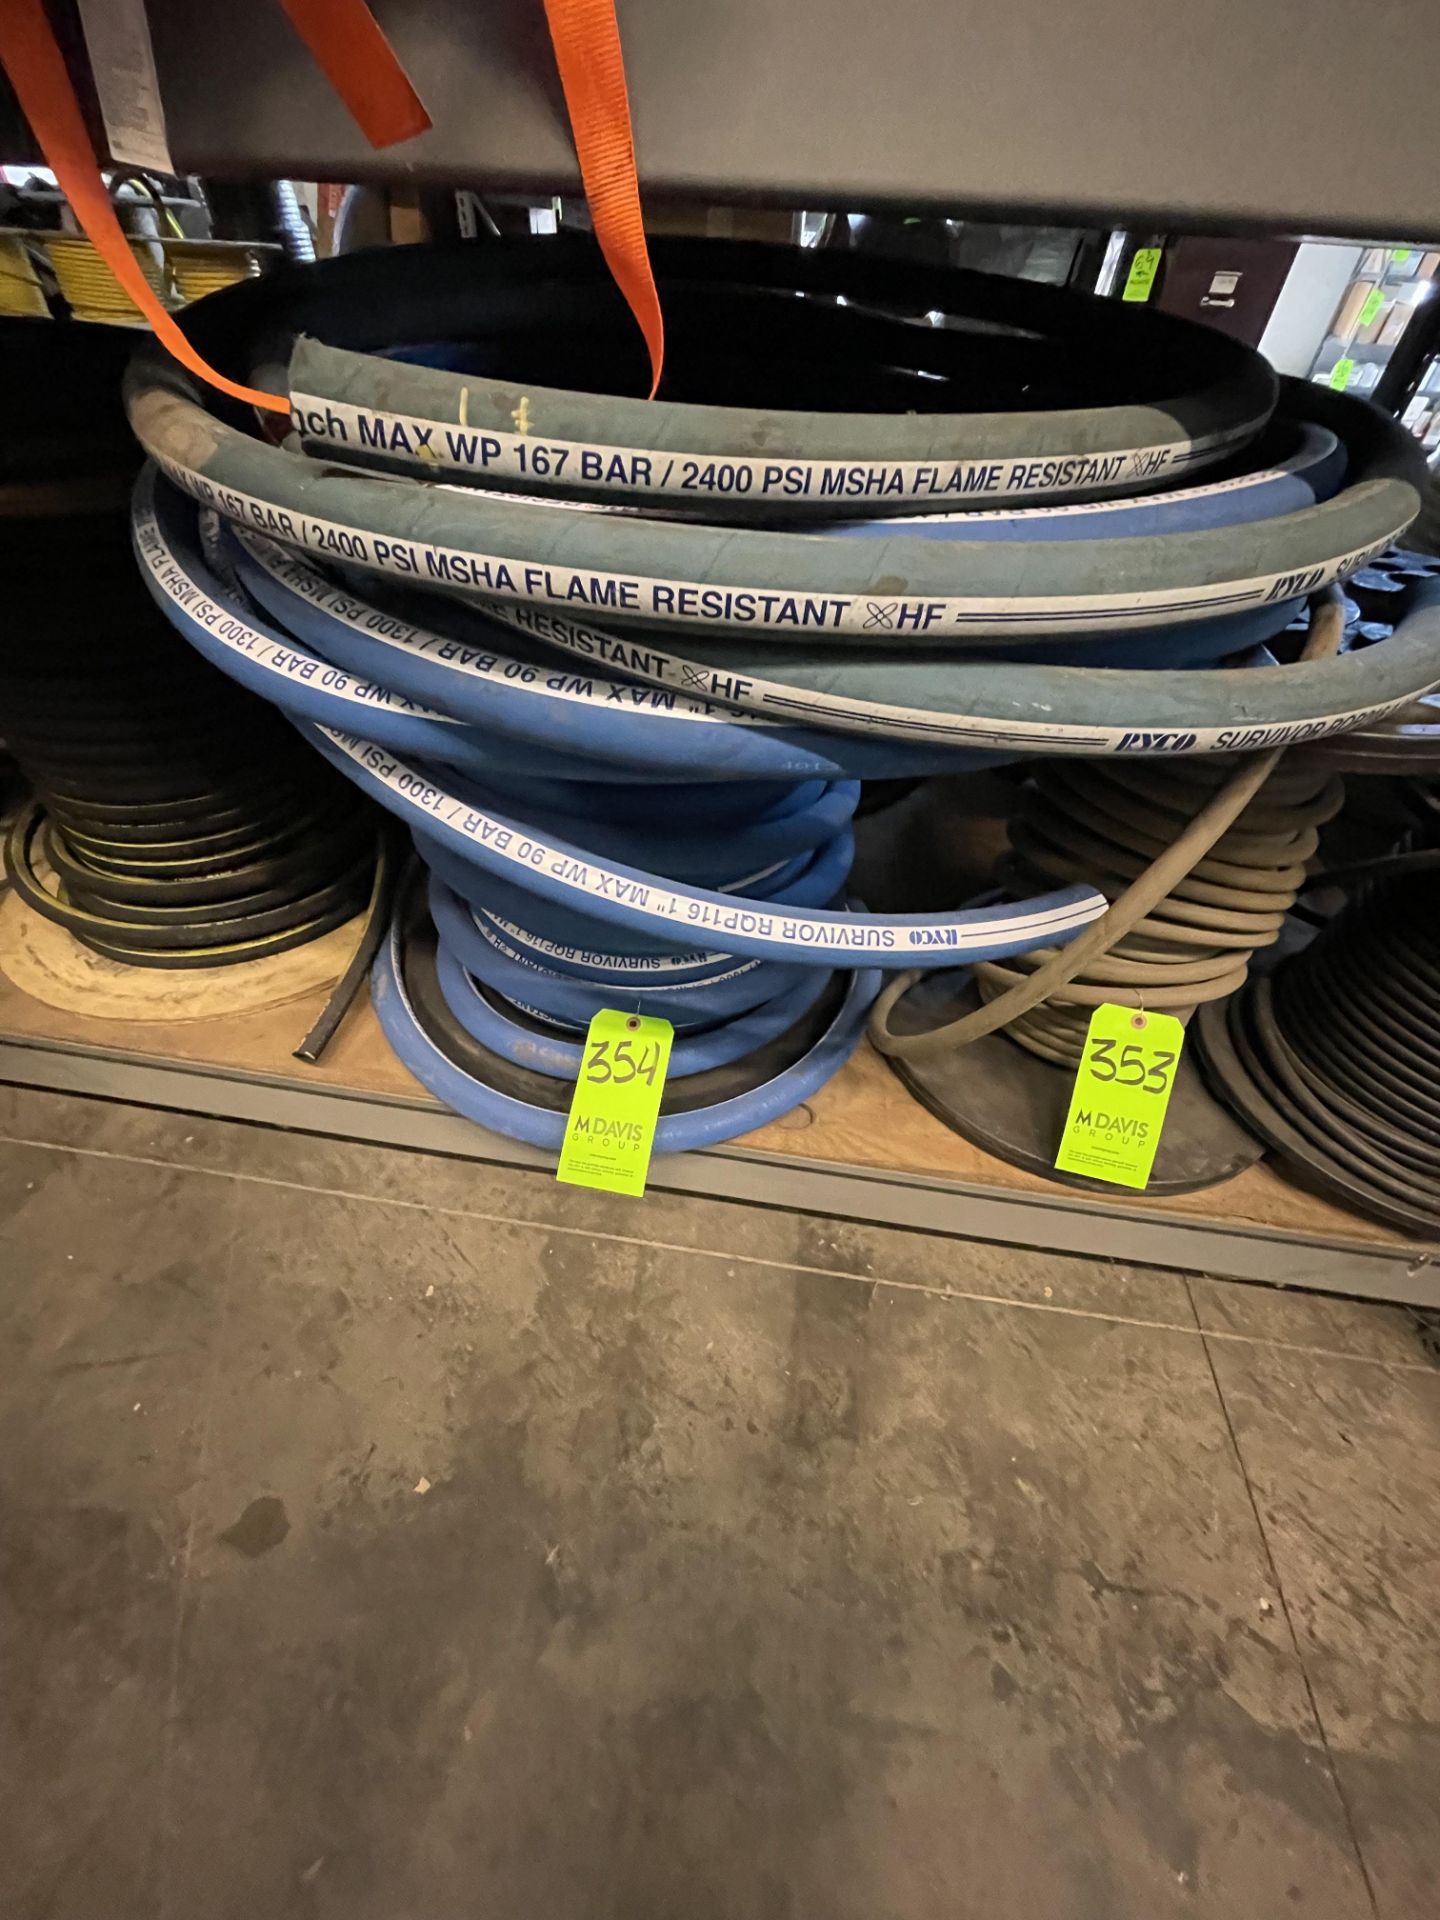 MULTIPLE RYCO SURVIVOR RQP HYDRAULIC HOSES 1" 1300psi (ALL PURCHASES MUST BE PAID FOR AND REMOVED BY